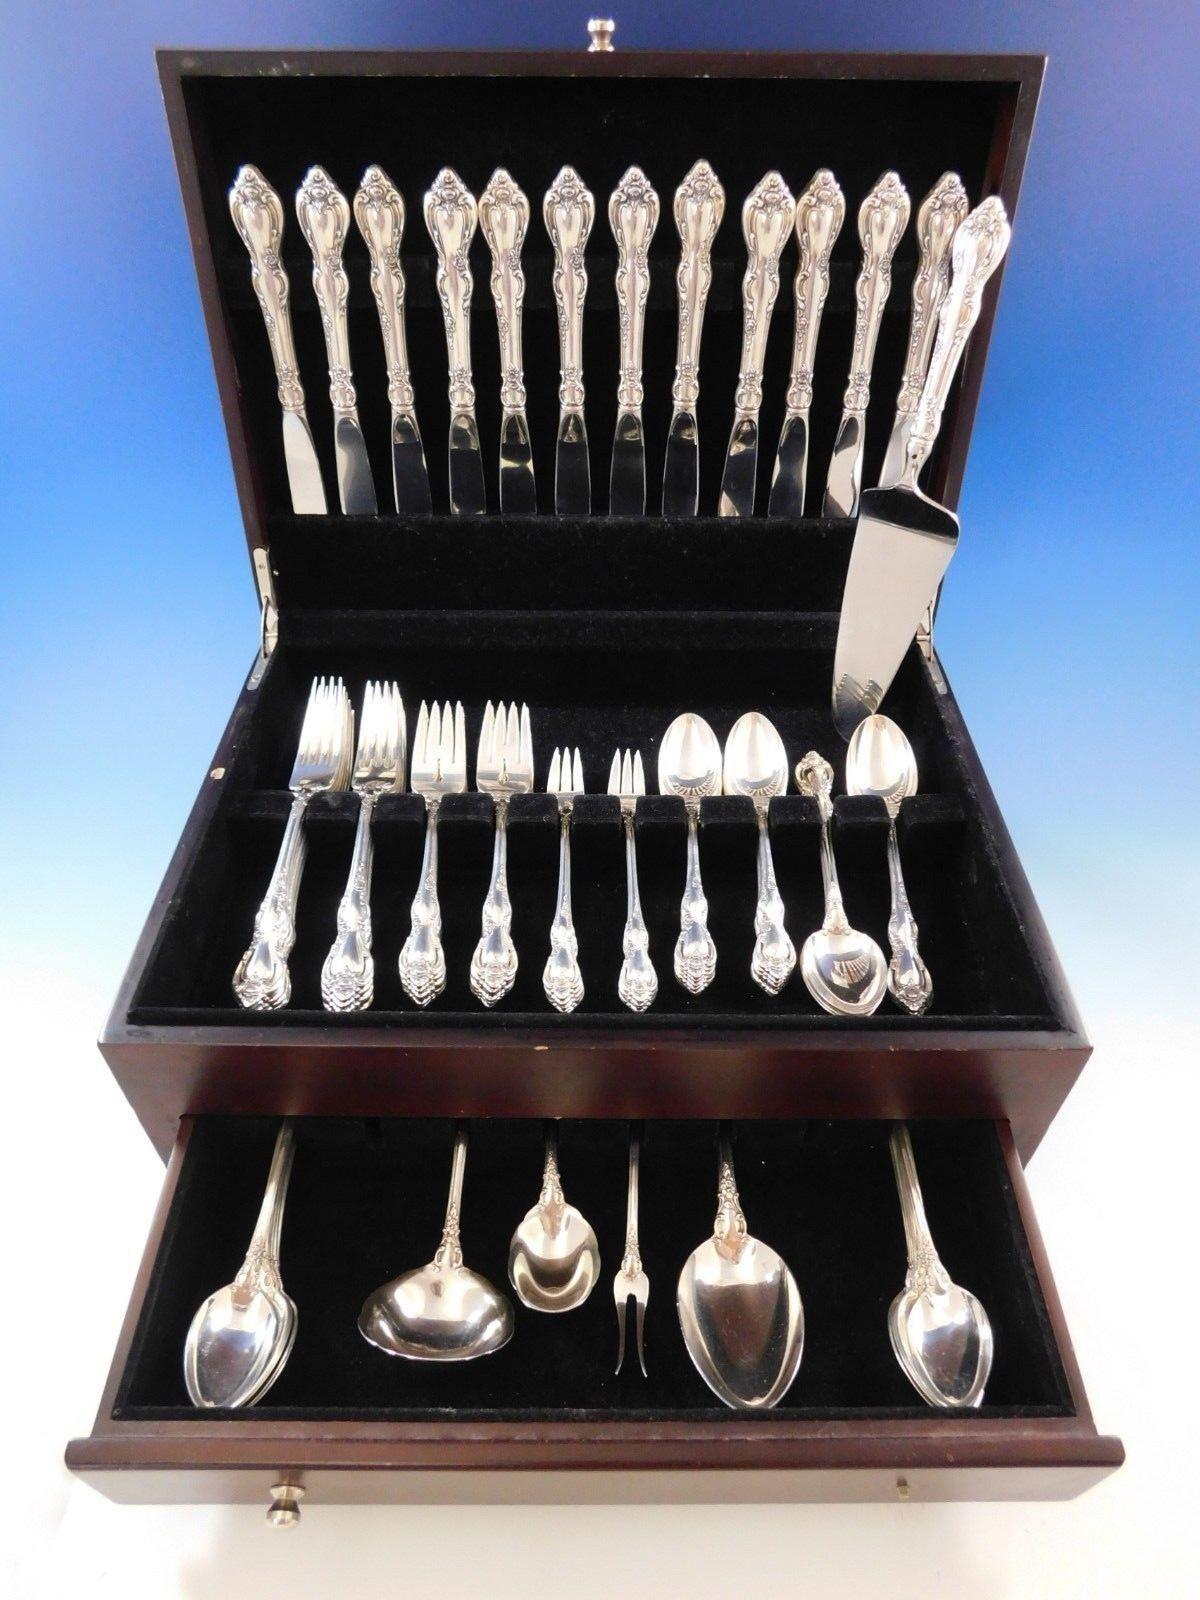 Captivating Spanish Provincial by Towle sterling silver flatware set - 89 pieces. This set includes:

12 knives, 8 3/4